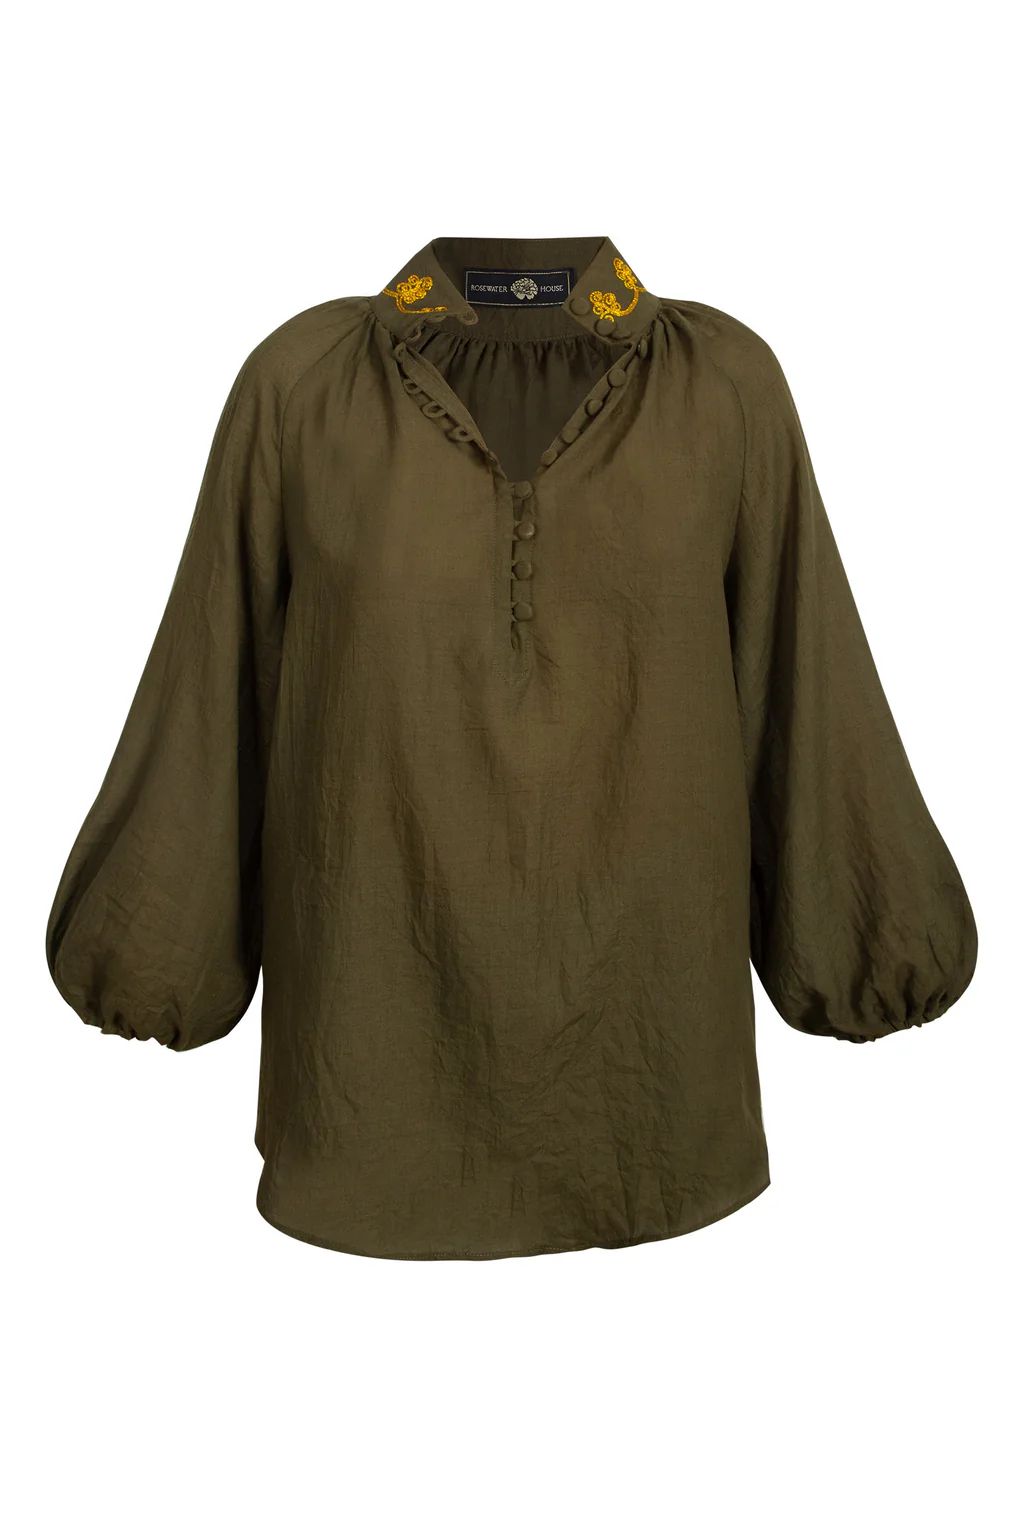 Golab Blouse - Army Green | Rosewater Collective